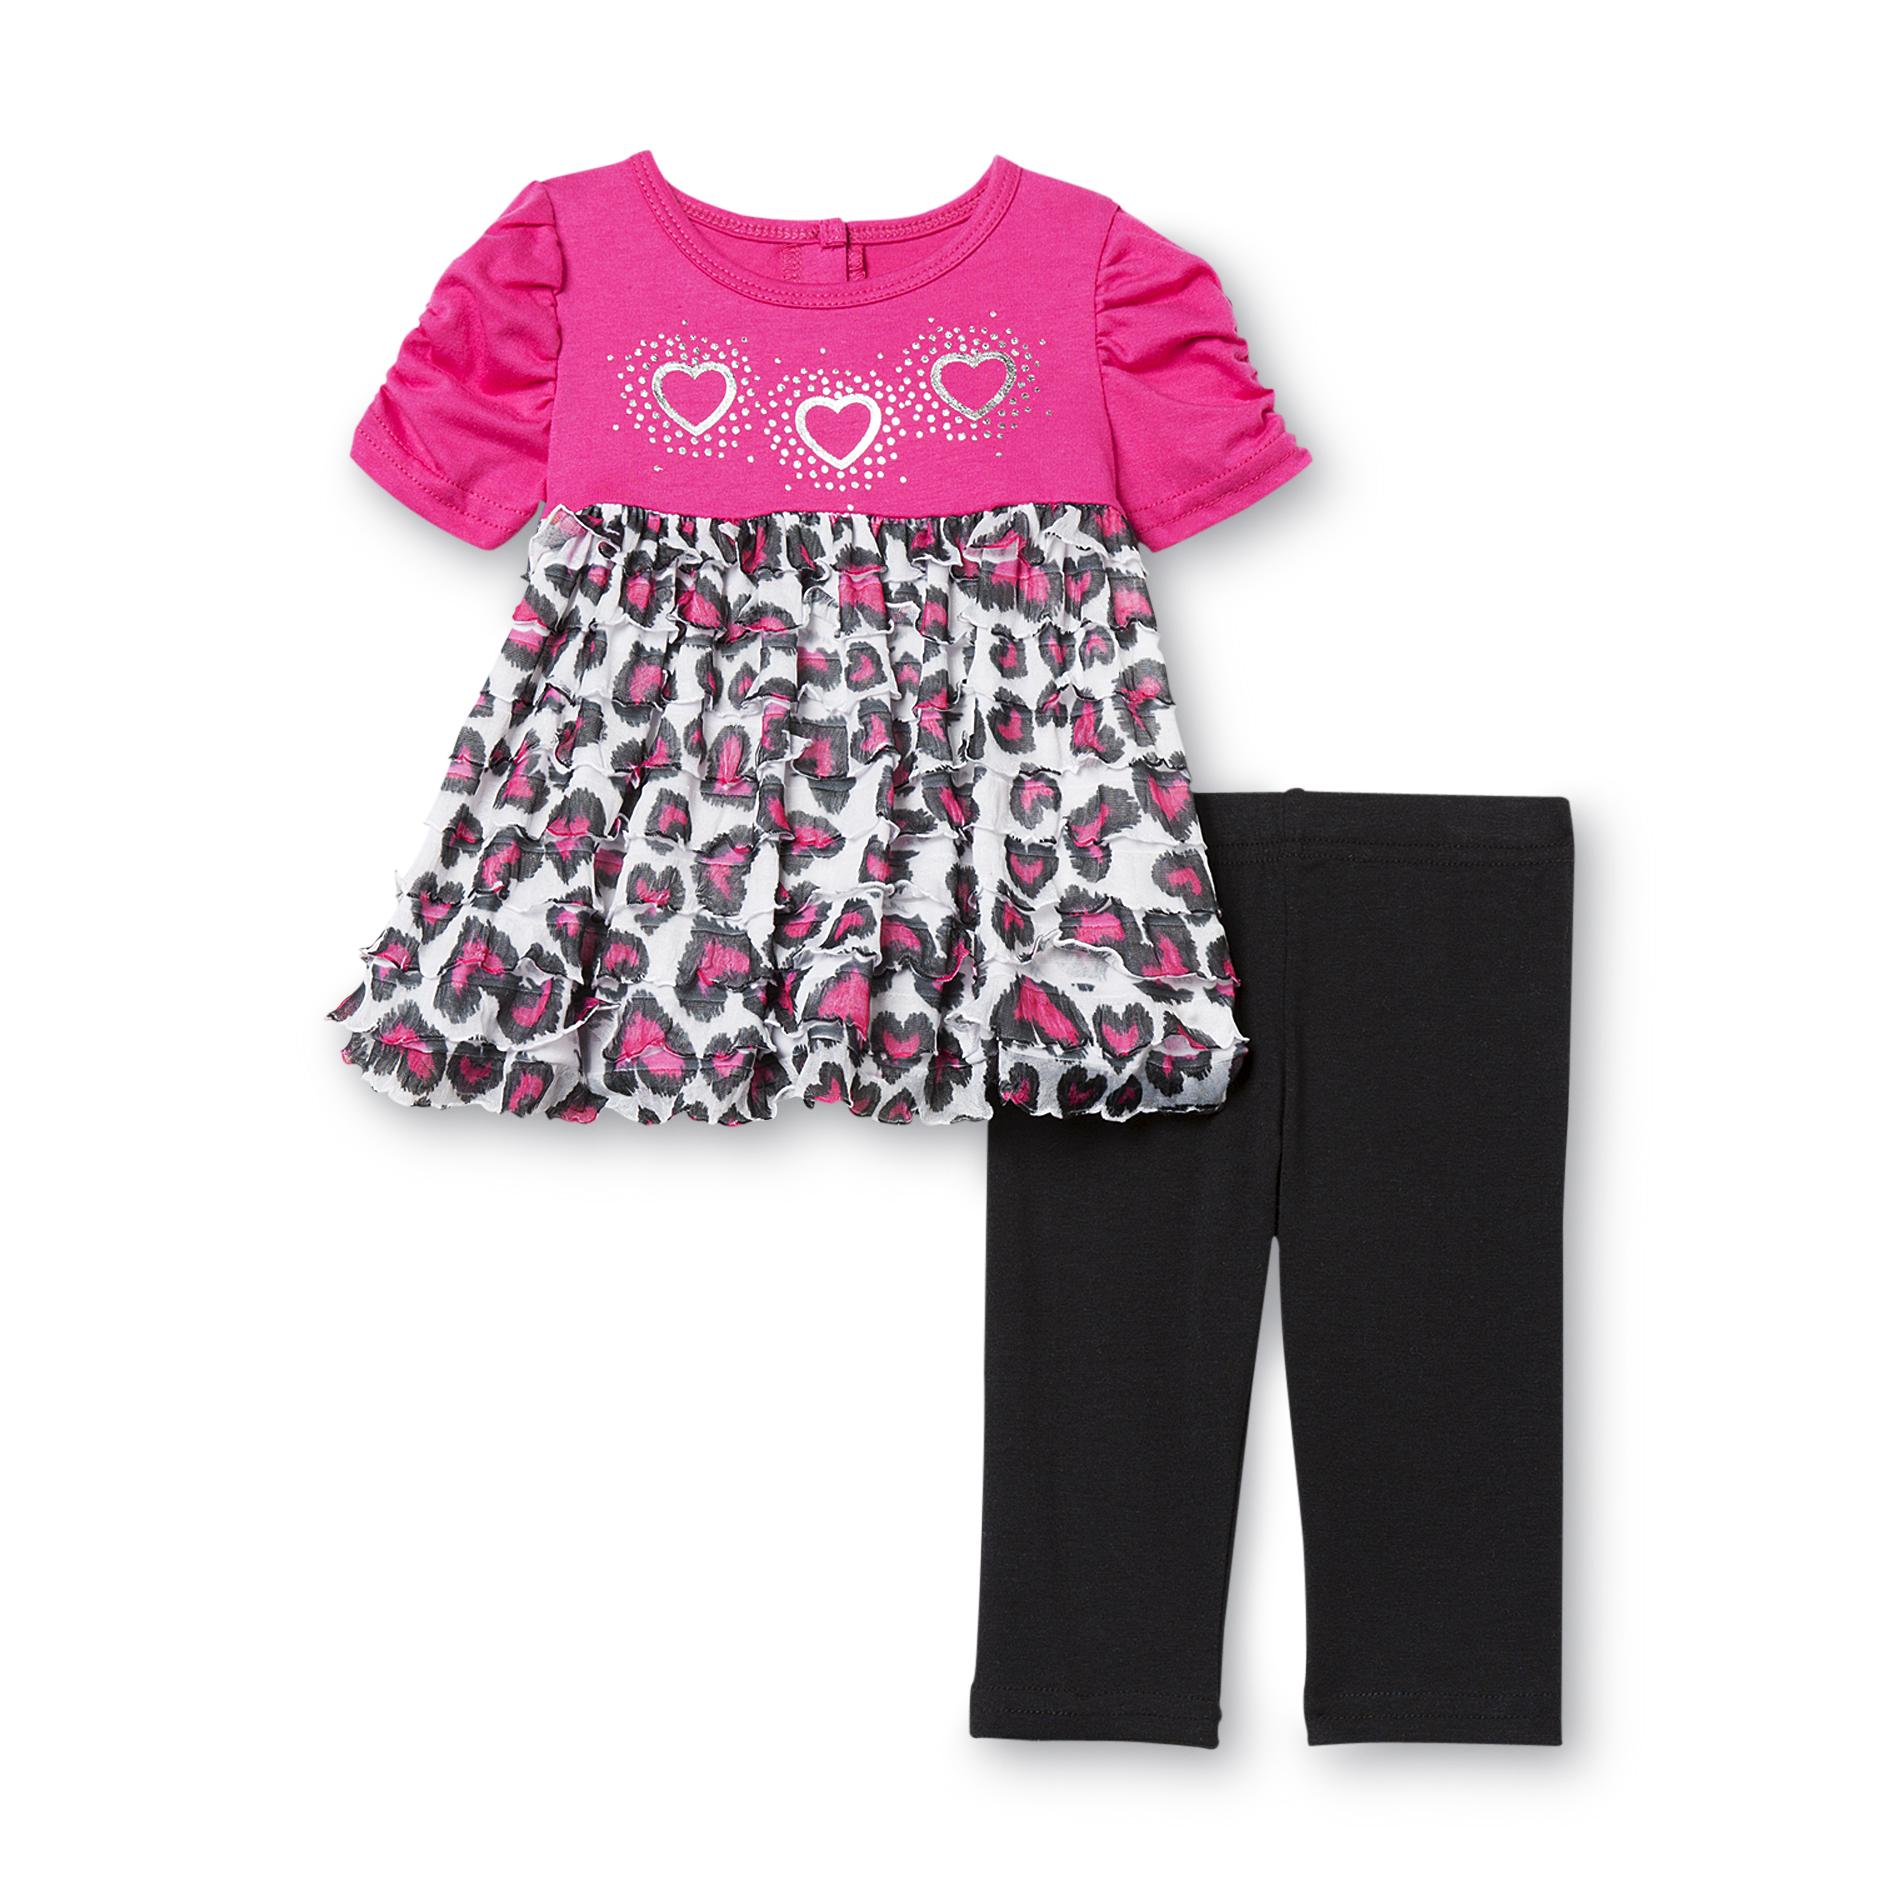 Small Wonders Infant Girl's Tunic Top & Pants - Hearts